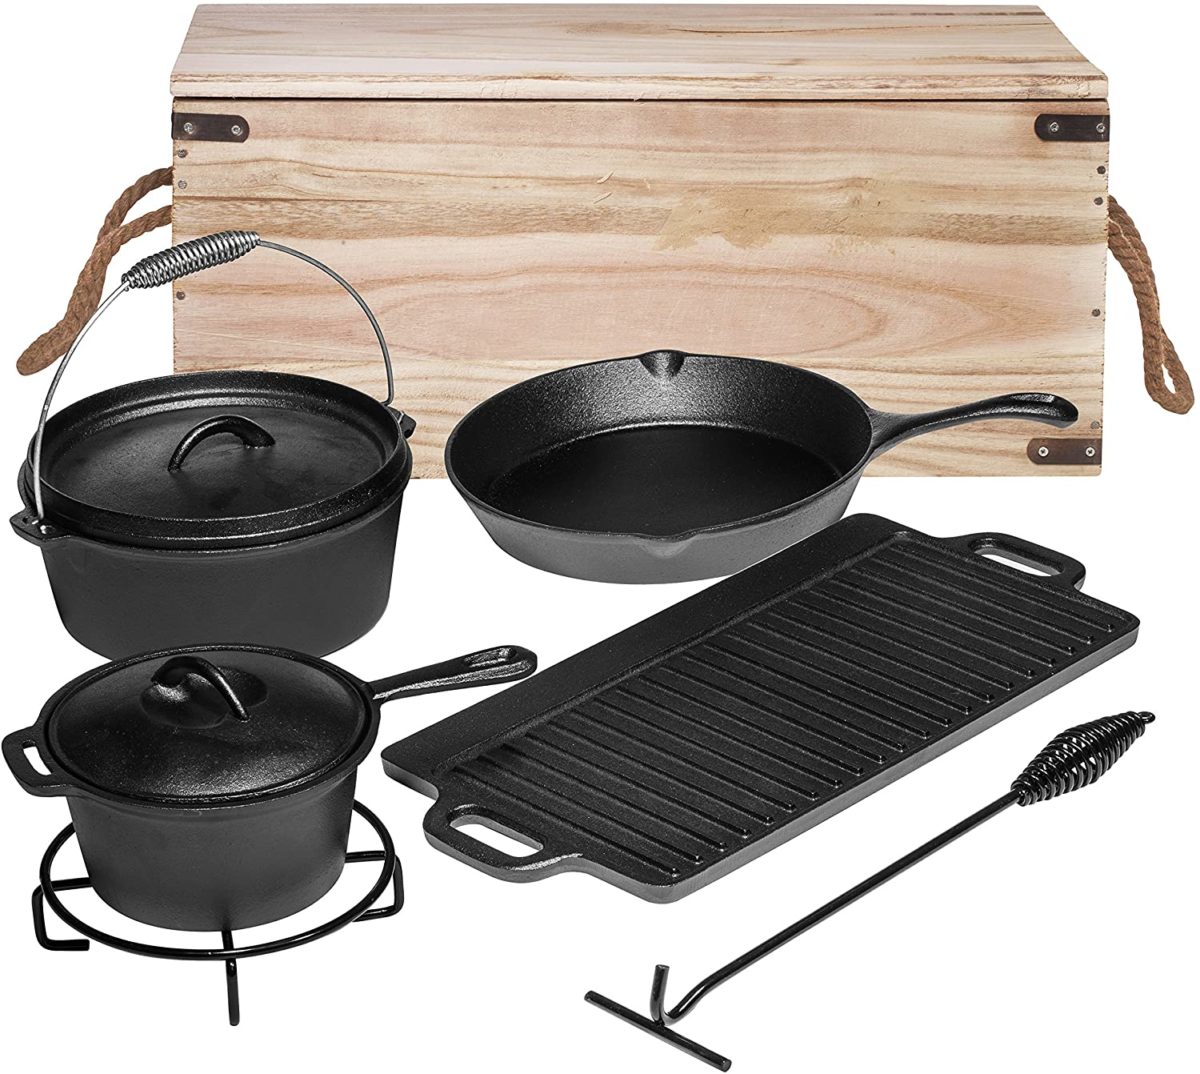 Get Prepared with a Campfire Cooking Kit